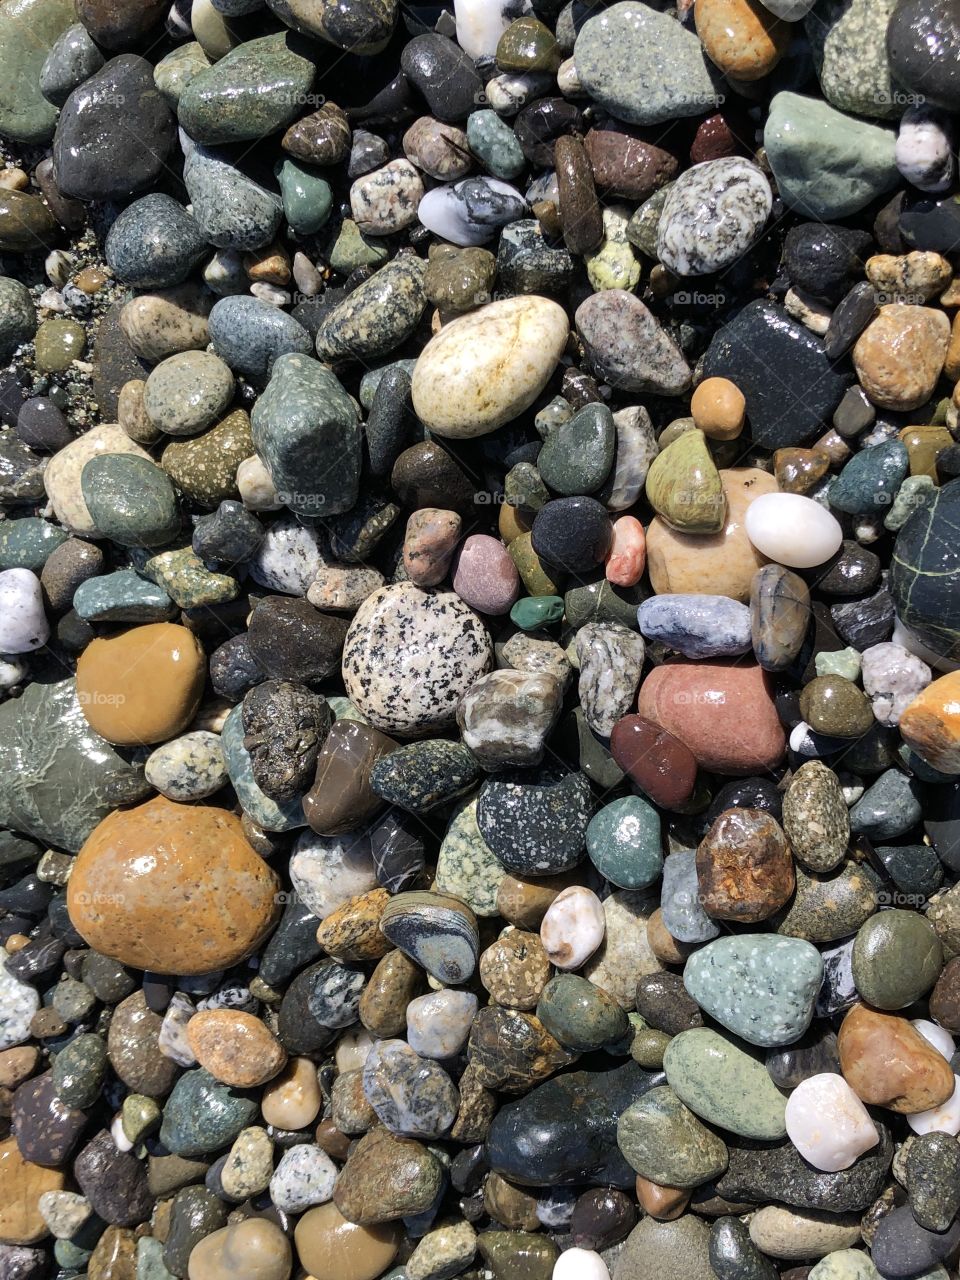 Colorful natural stones on a beach in the Pacific Northwest PNW